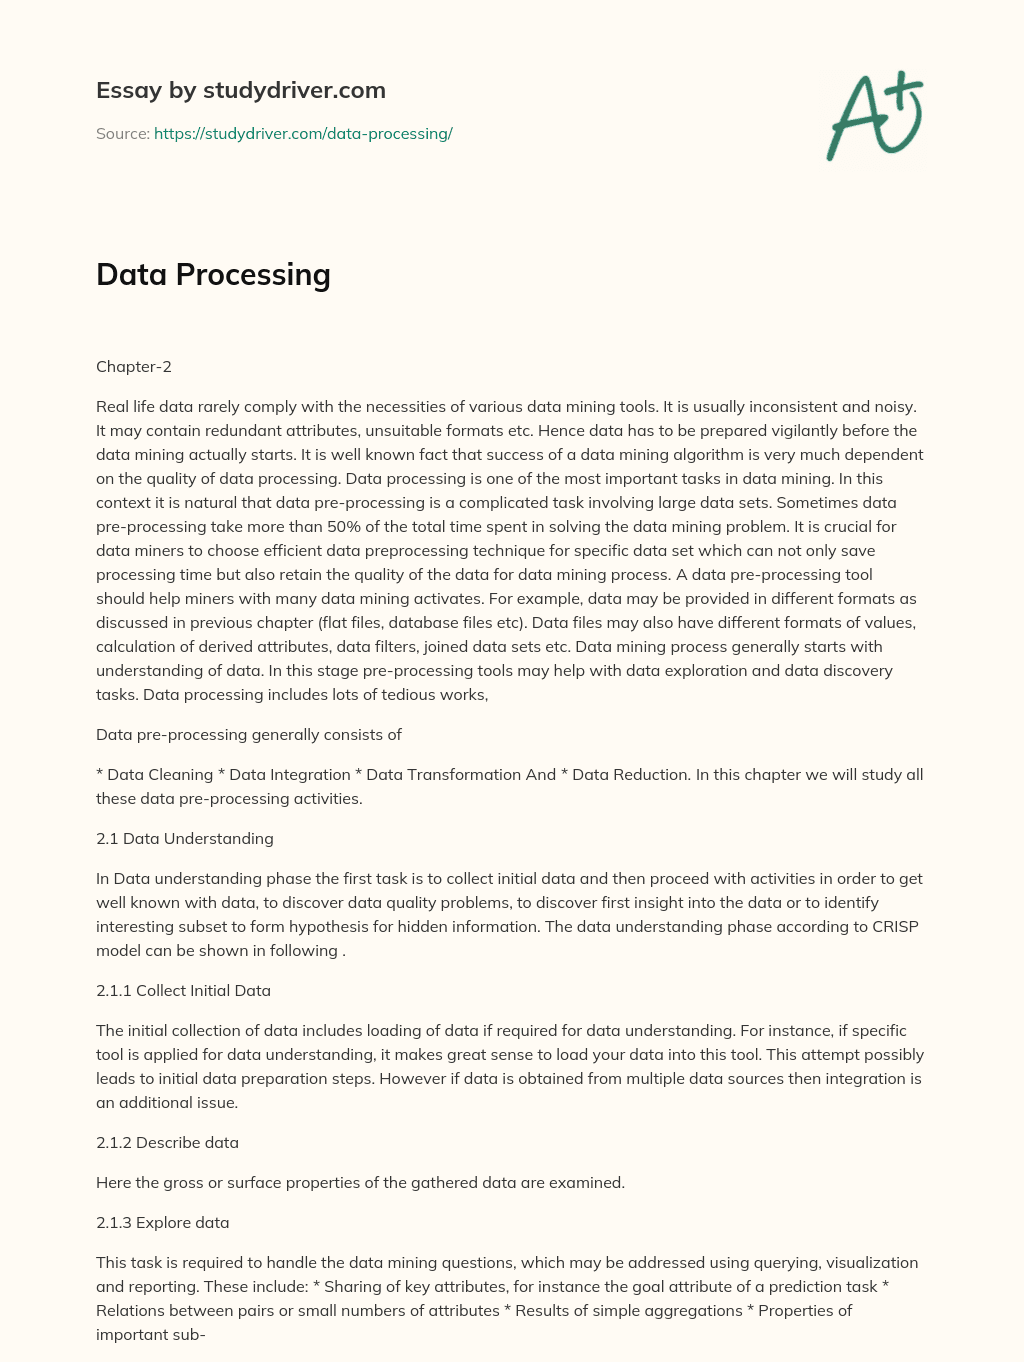 essay about data processing